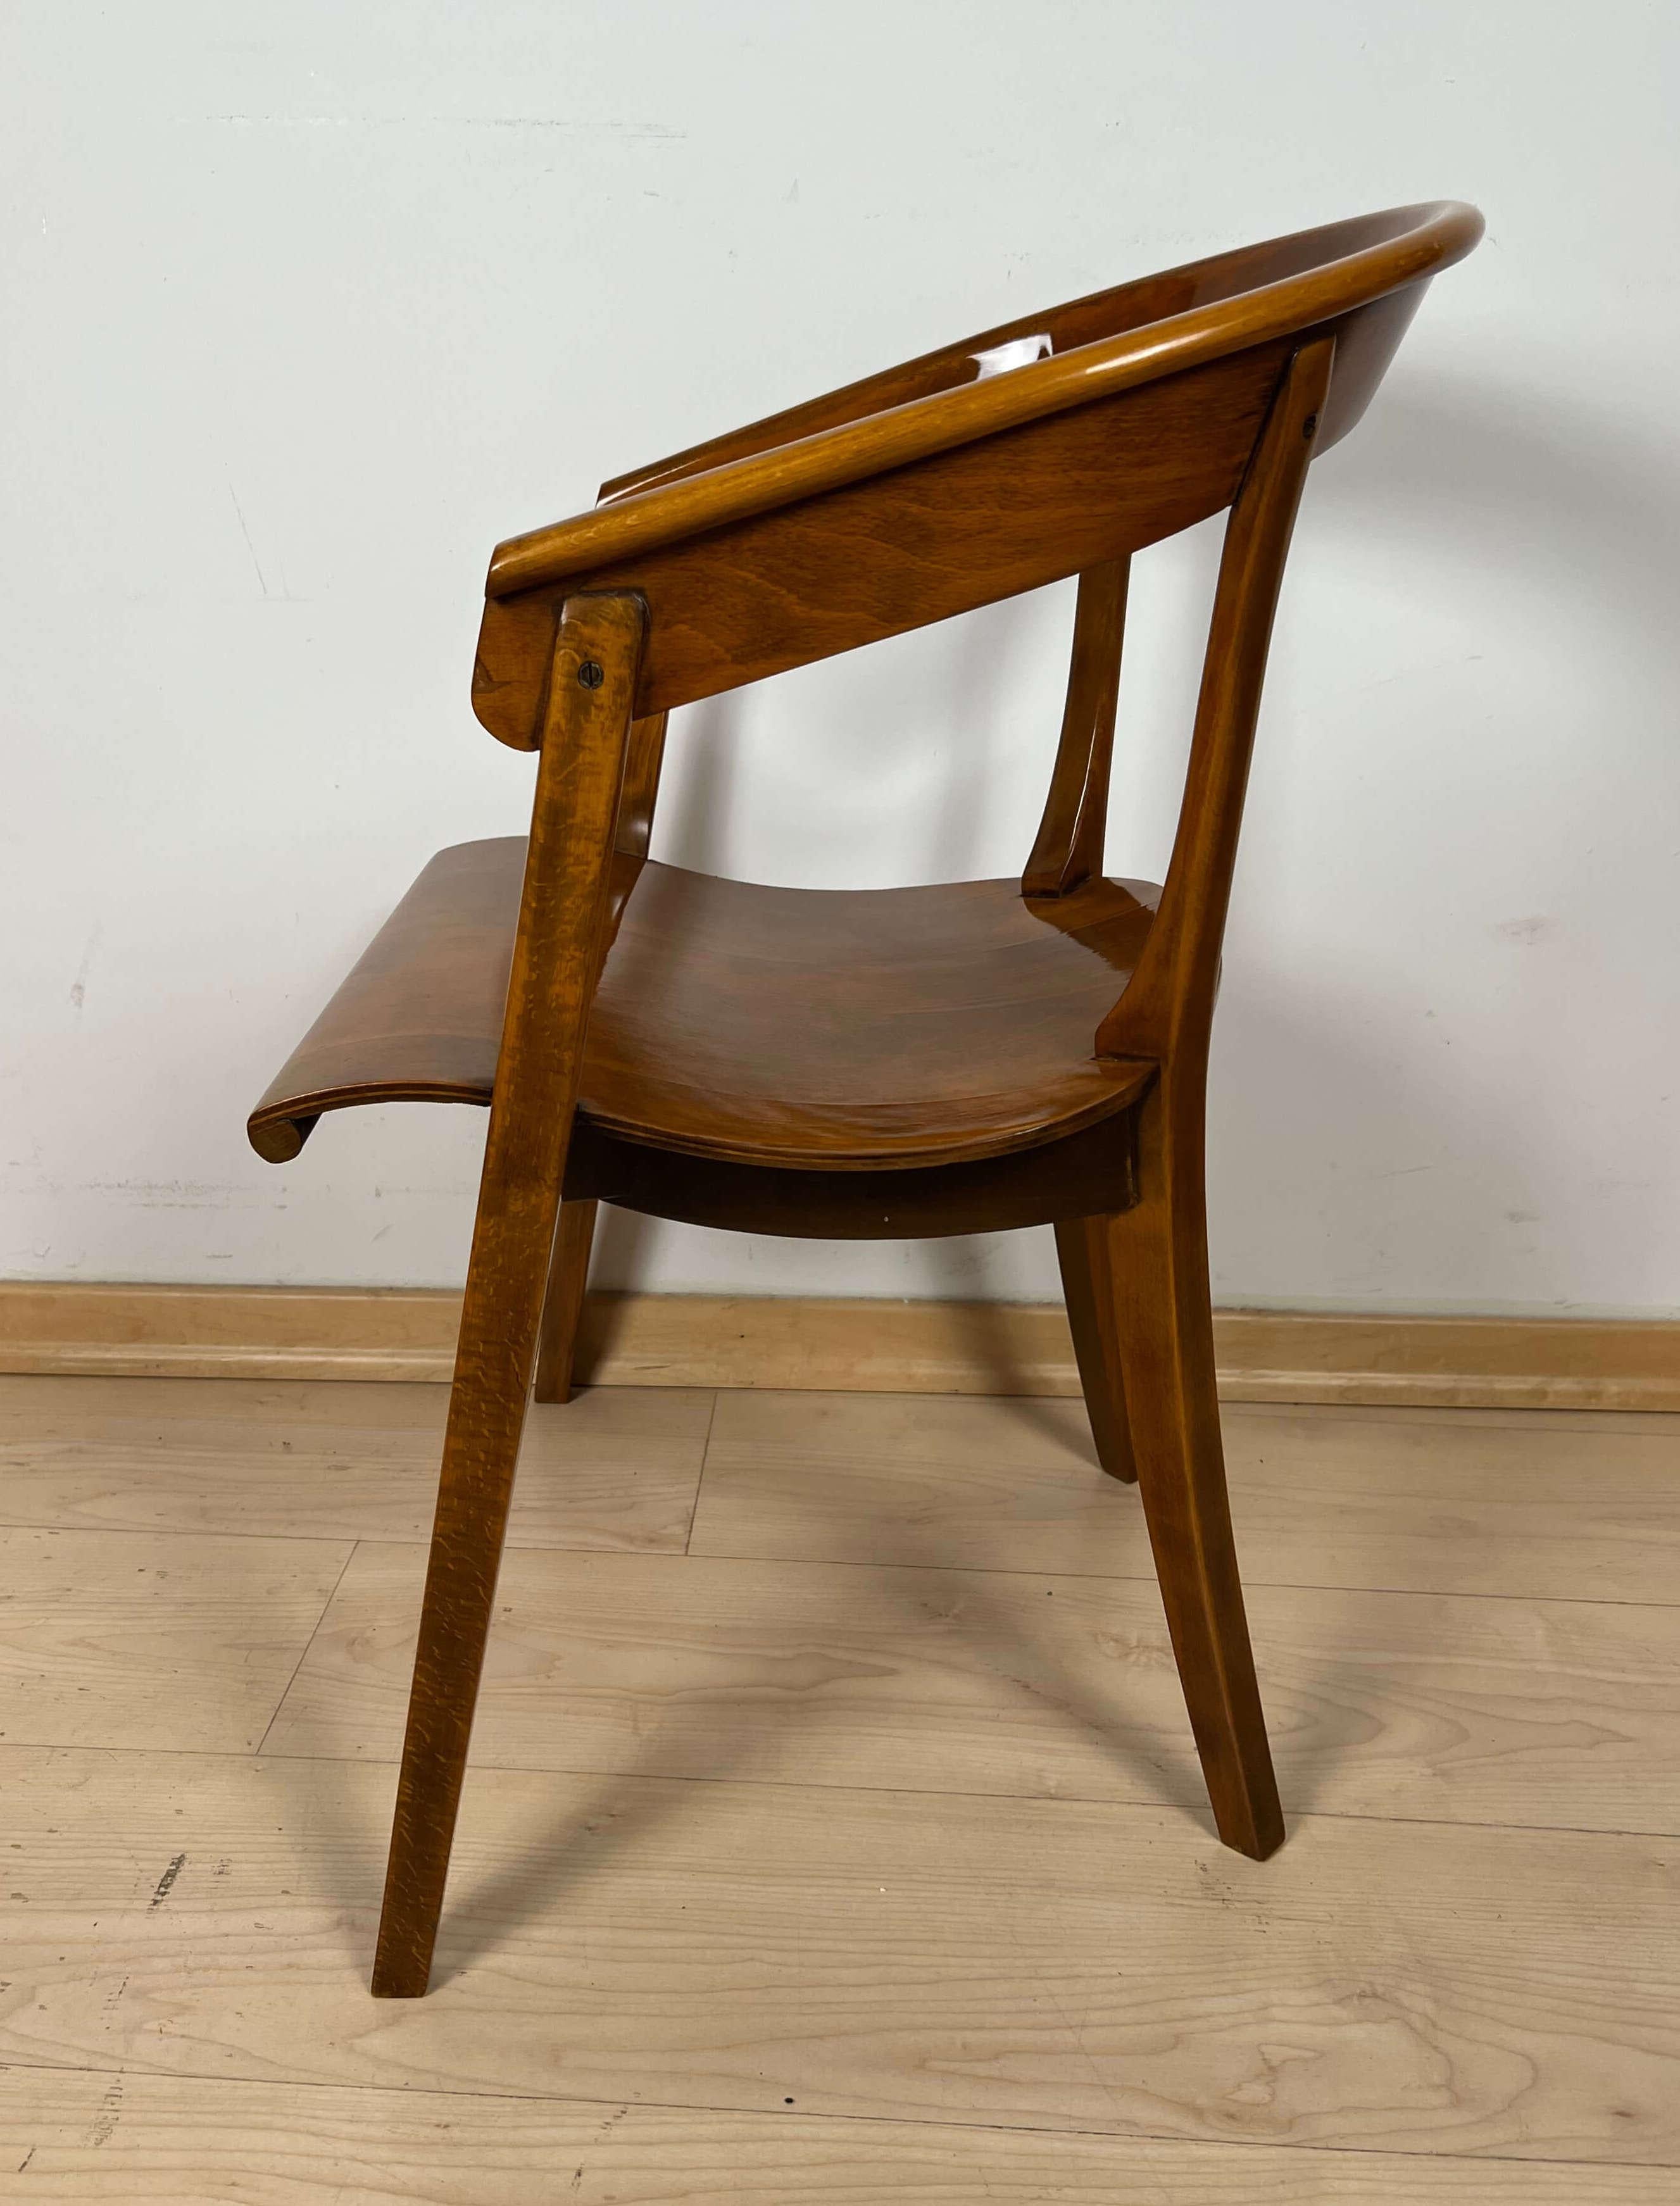 Bauhaus Armchair by Rockhausen, Polished Wood, Germany, 1928 In Good Condition For Sale In Regensburg, DE